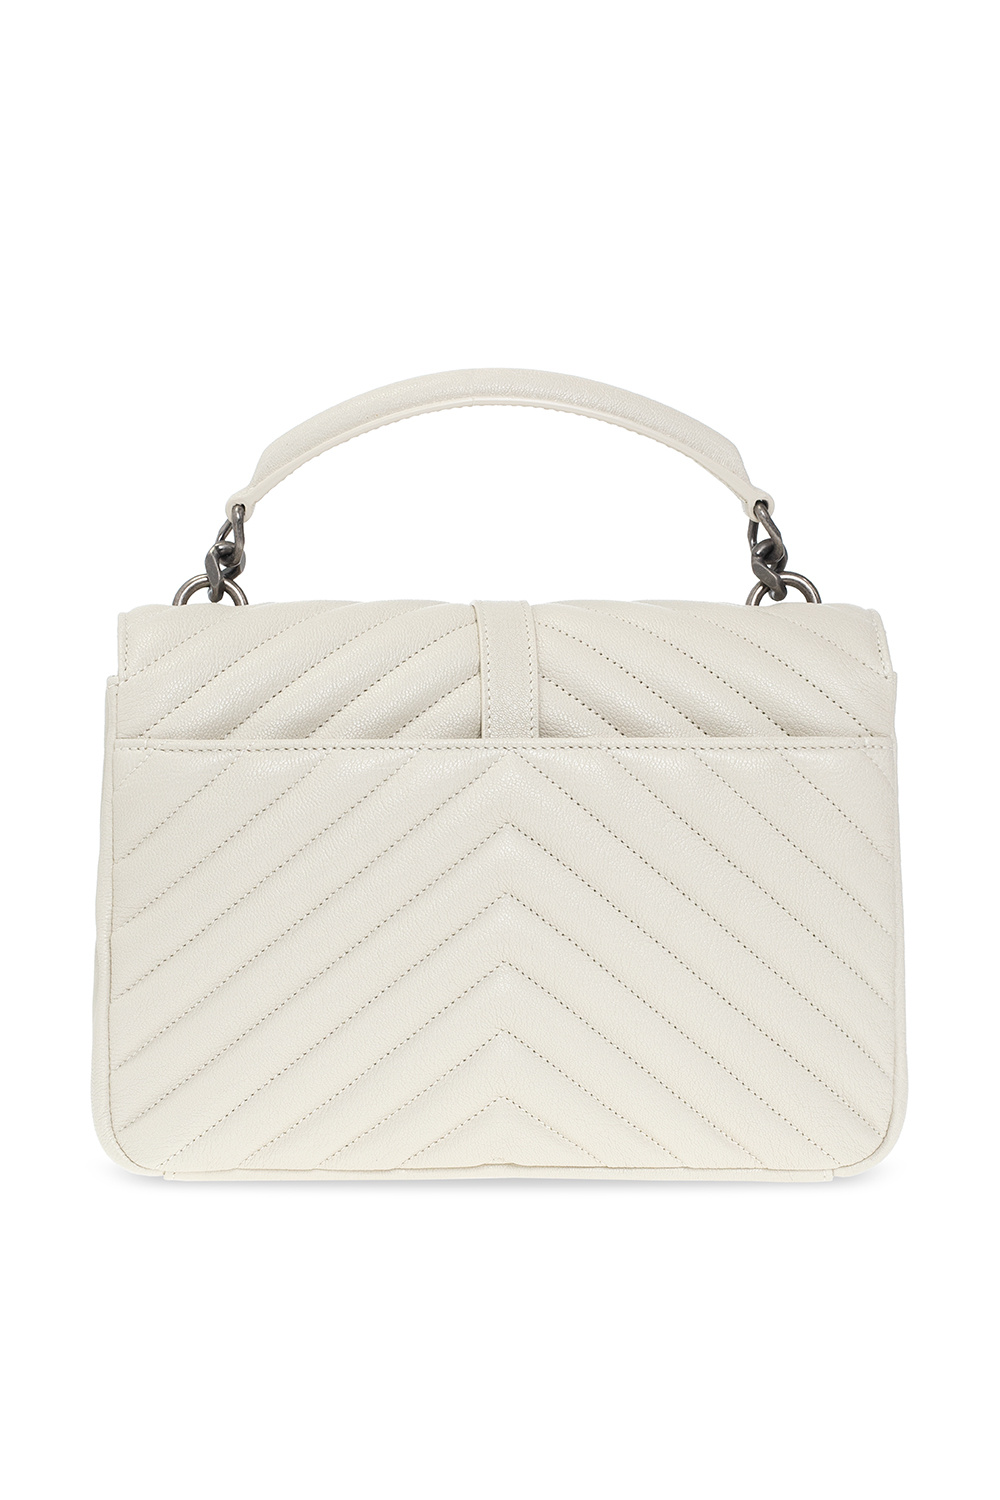 Saint Laurent Monogramme Quilted Textured-leather Pouch - Cream